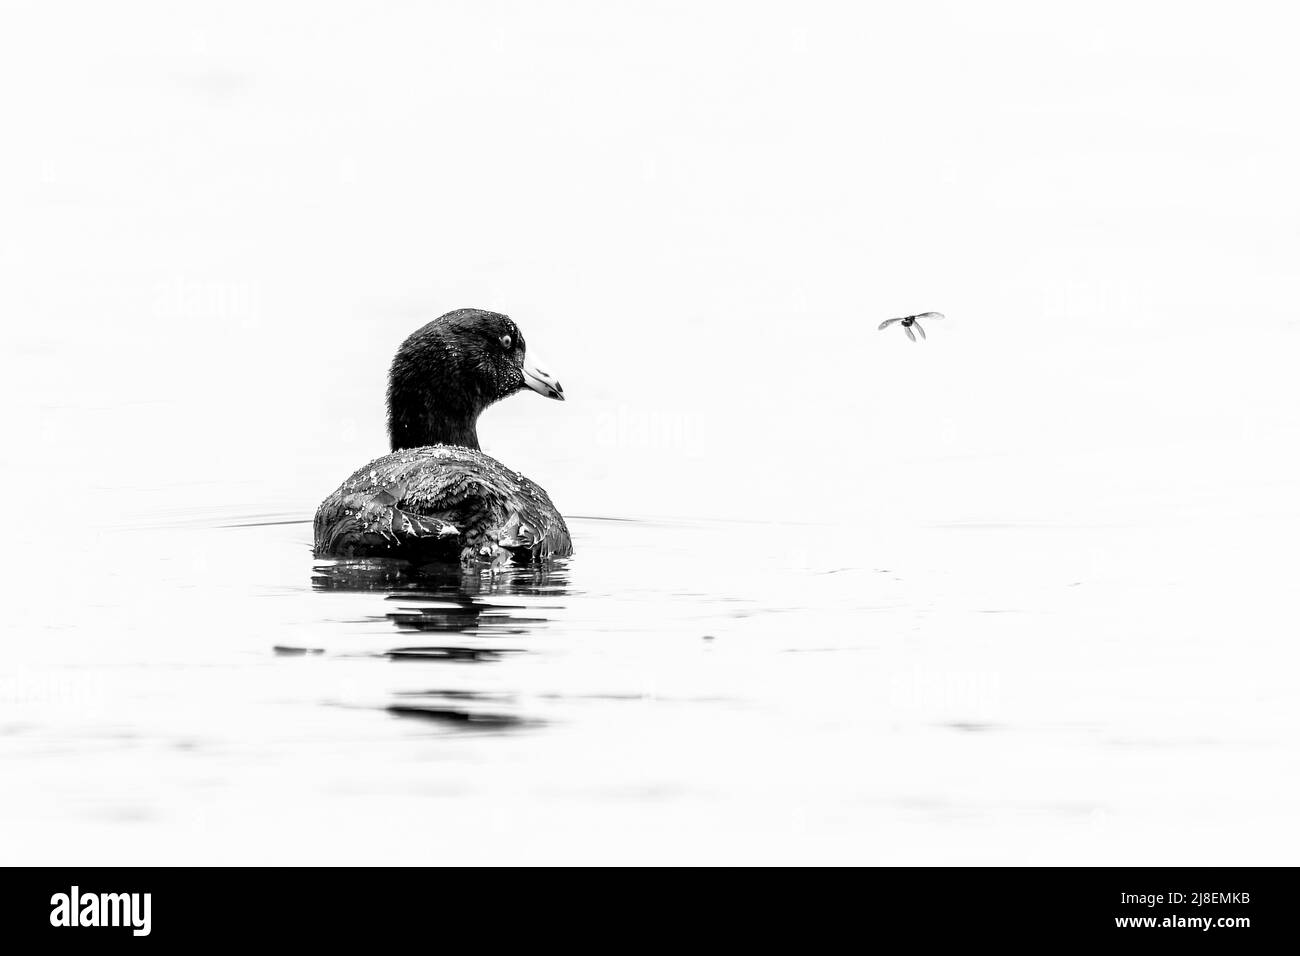 An American coot, Fulica americana, shown in a high-key black and white photo, eyes an insect flying past it Stock Photo